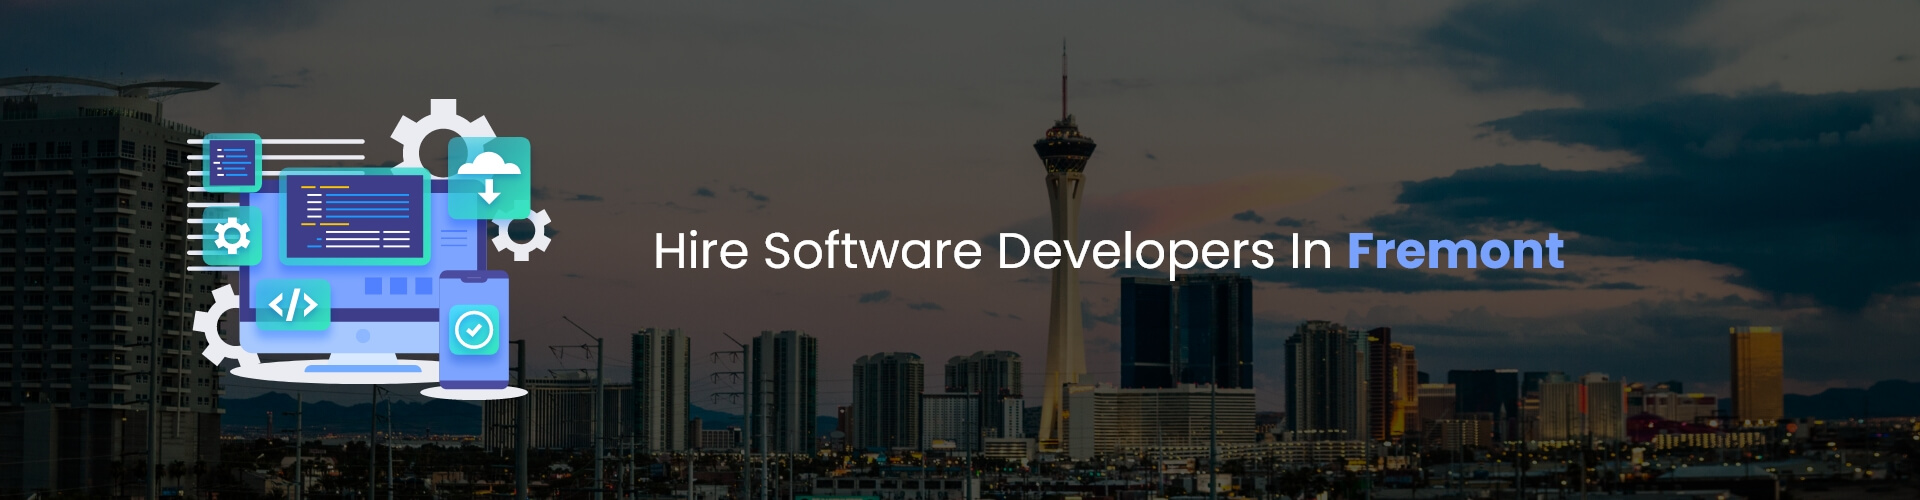 hire software developers in fremont